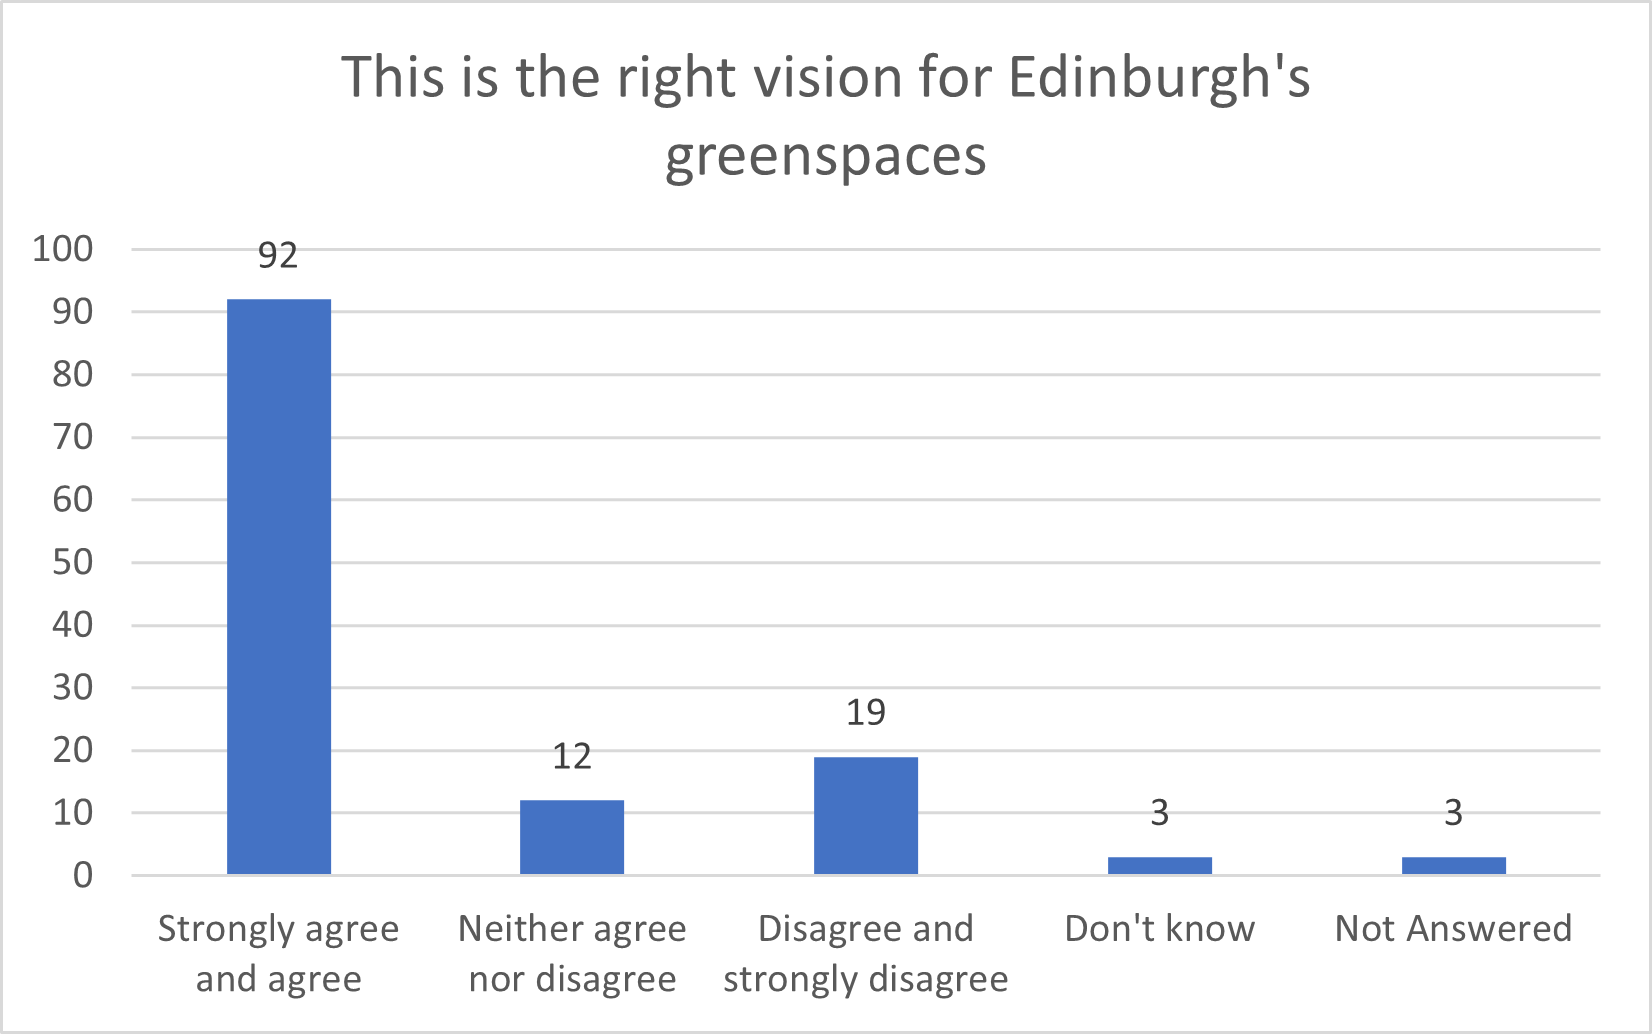 A bar chart showing attitudes to the vision and themes of the consultation on the draft document 'Thriving Greenspaces, A vision and strategy for Edinburgh's public greenspaces to 2050'. The chart shows overwhelming majority support.